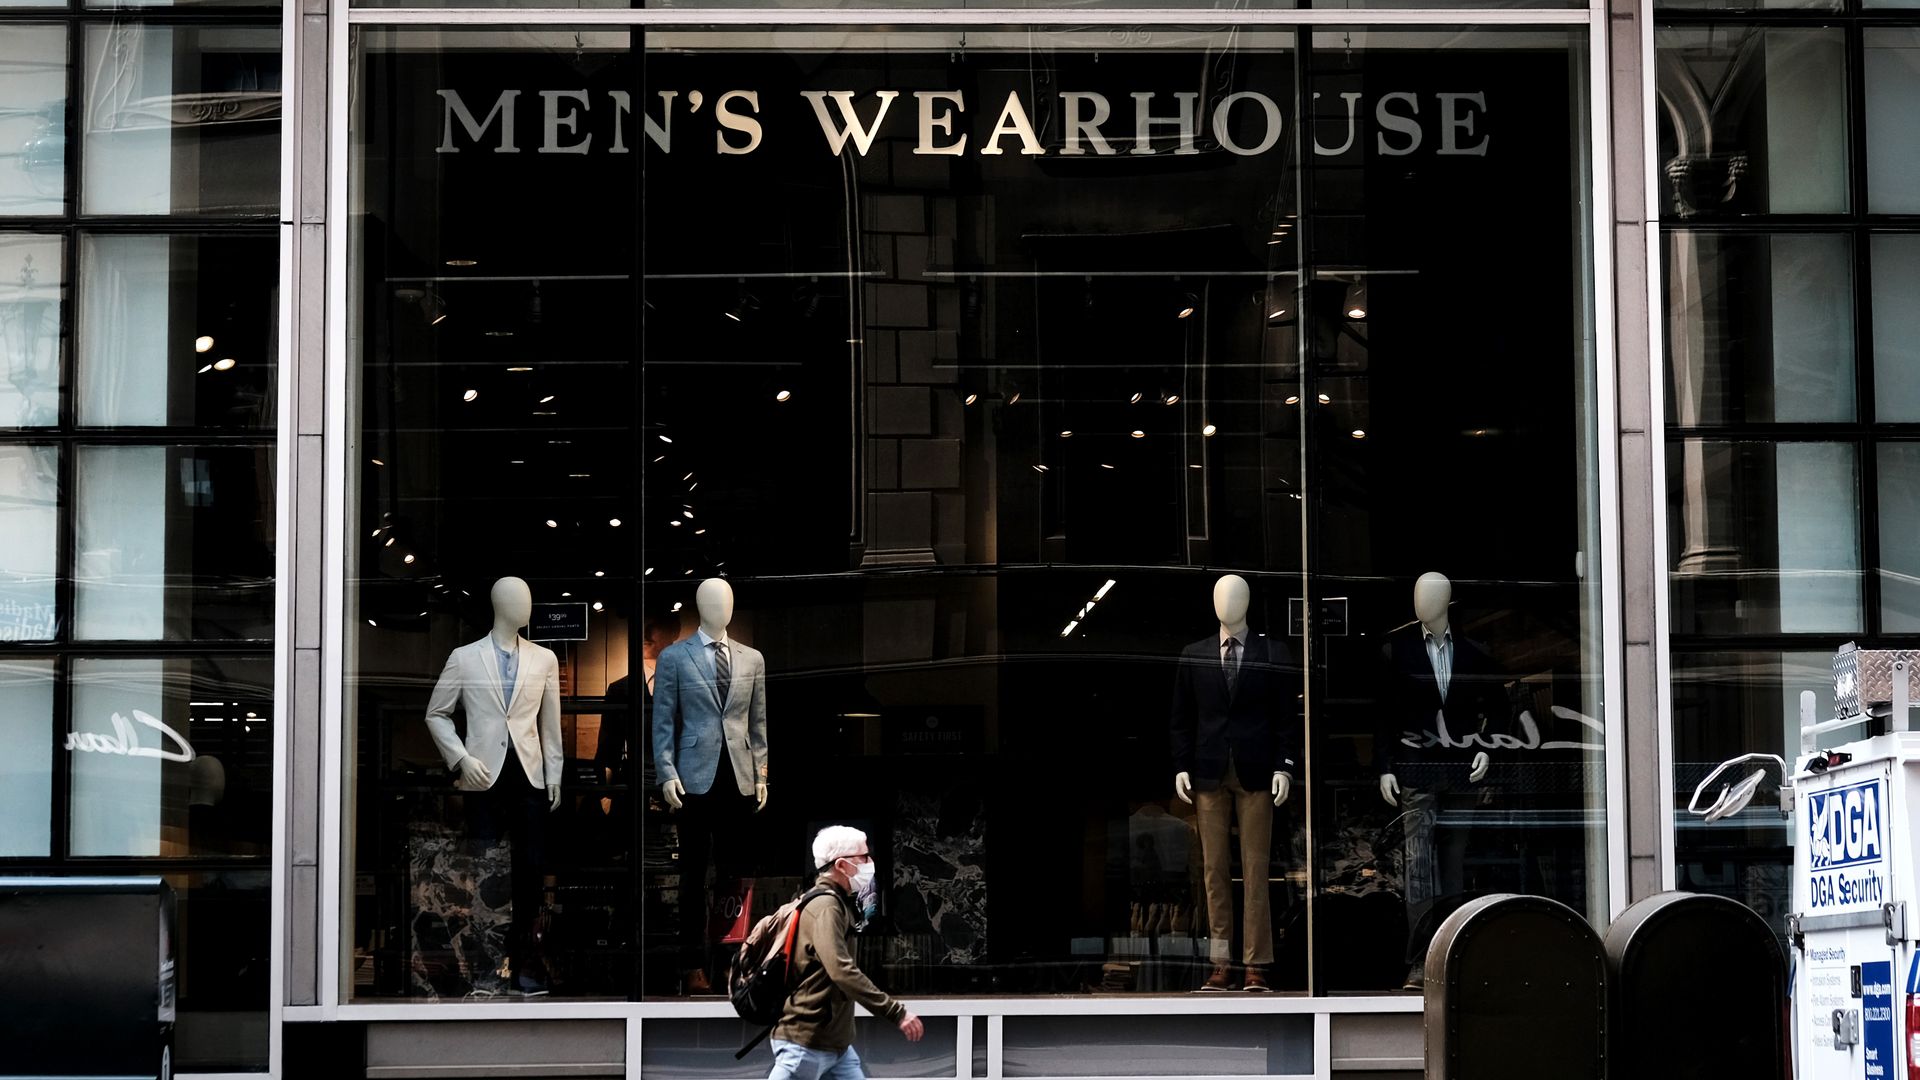 A pedestrian walks in front of a Men's Wearhouse store facade, with the signage spelled out in gold lettering, located on an urban city street.